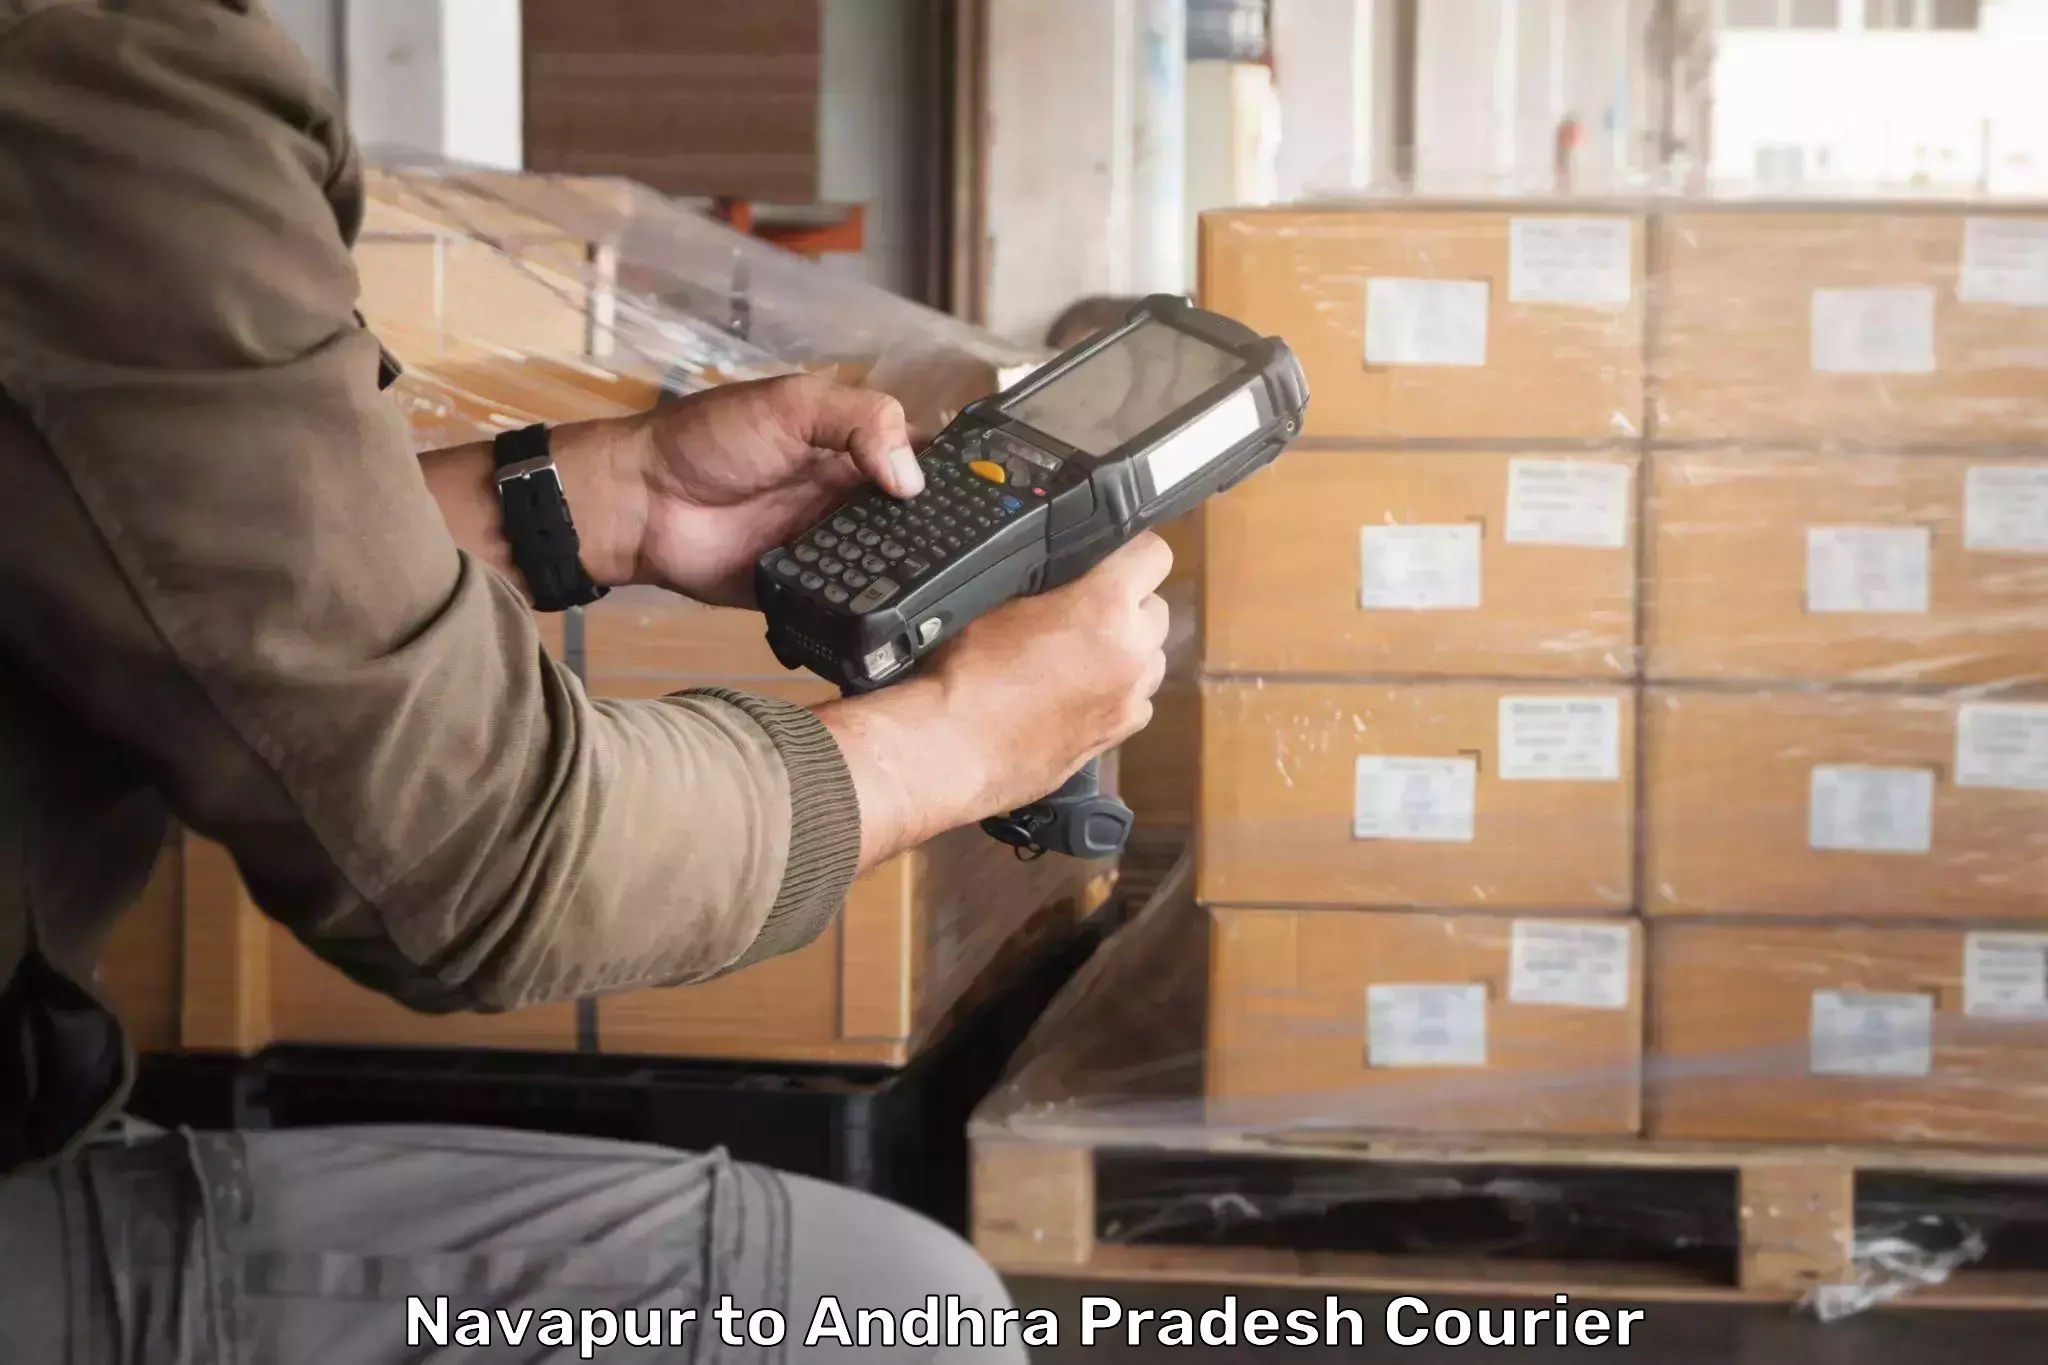 24/7 courier service Navapur to Adoni